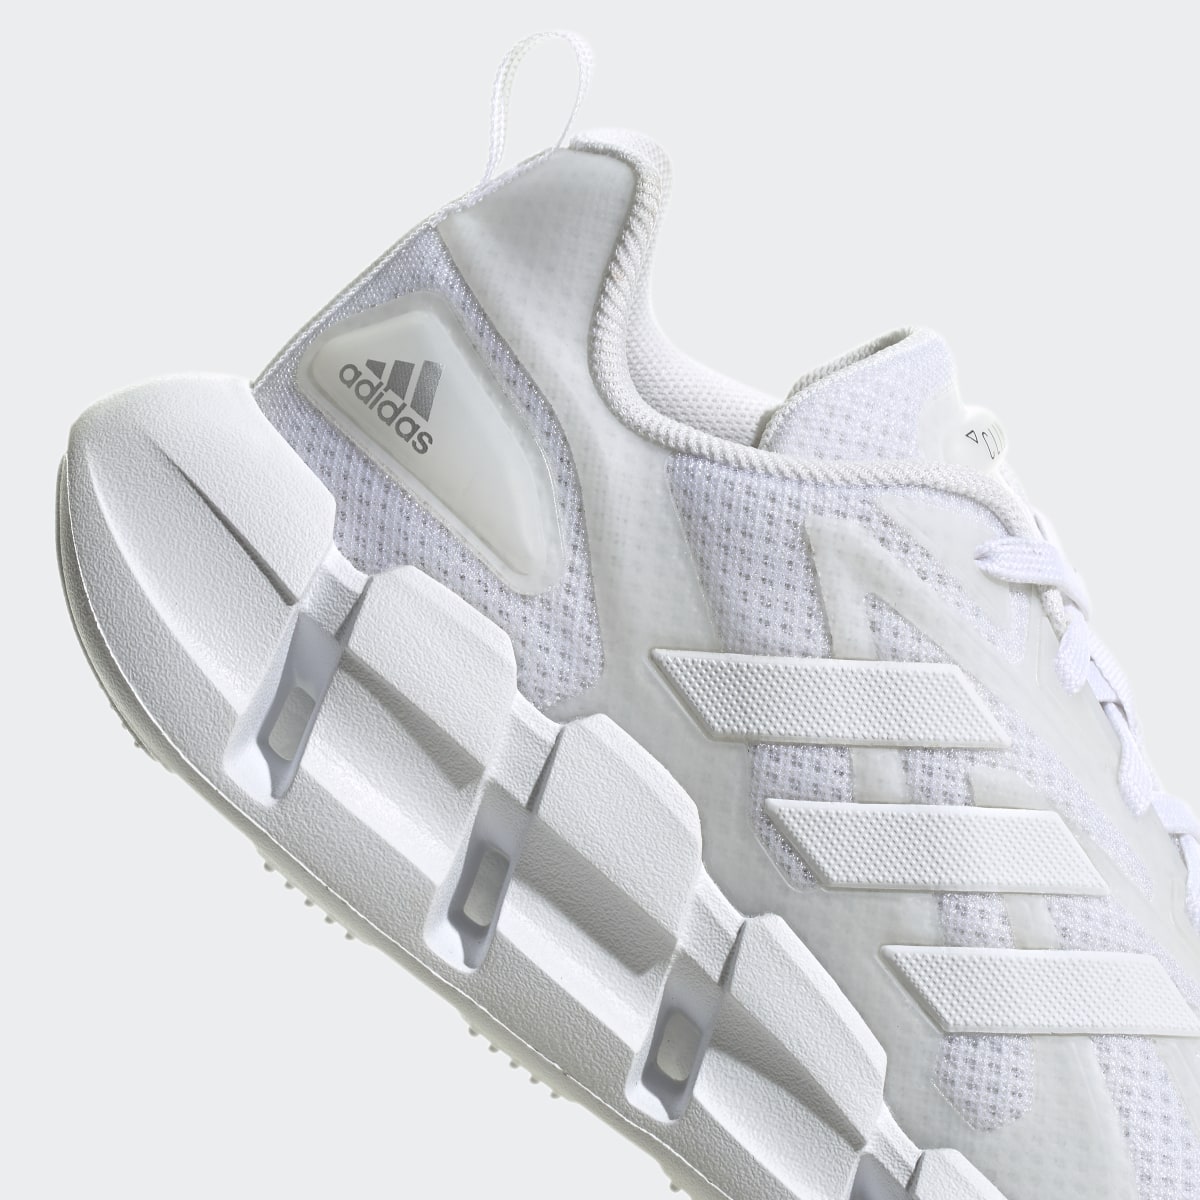 Adidas Ventice Climacool Shoes. 8